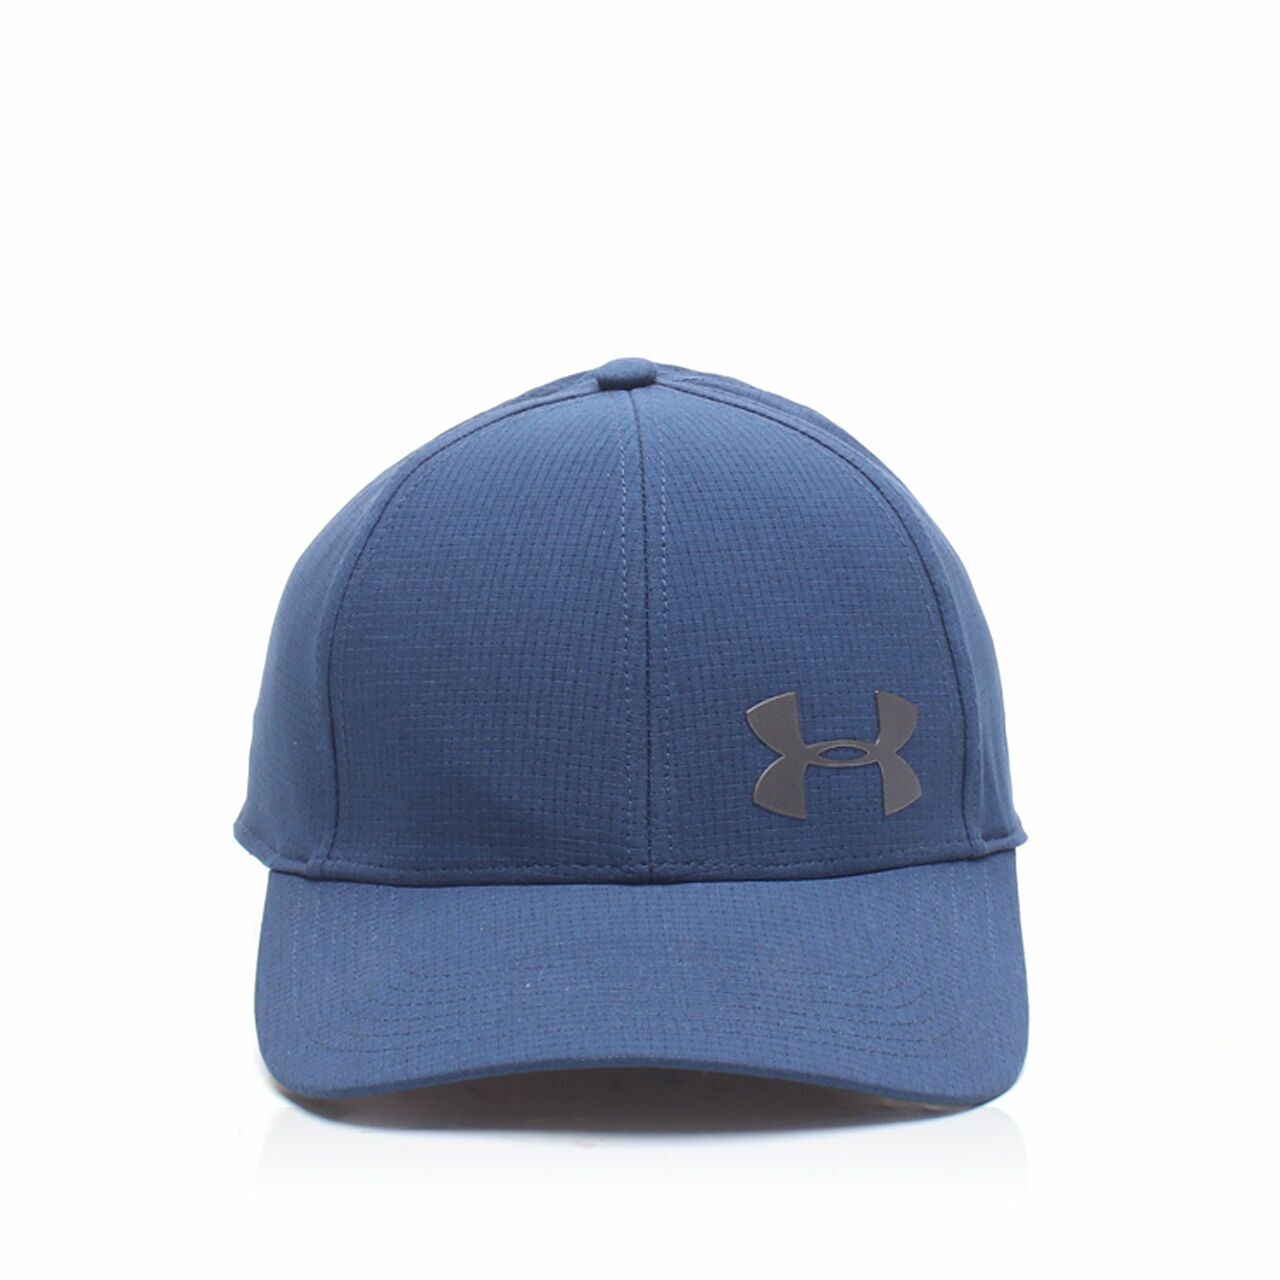 Under Armour Navy Hats